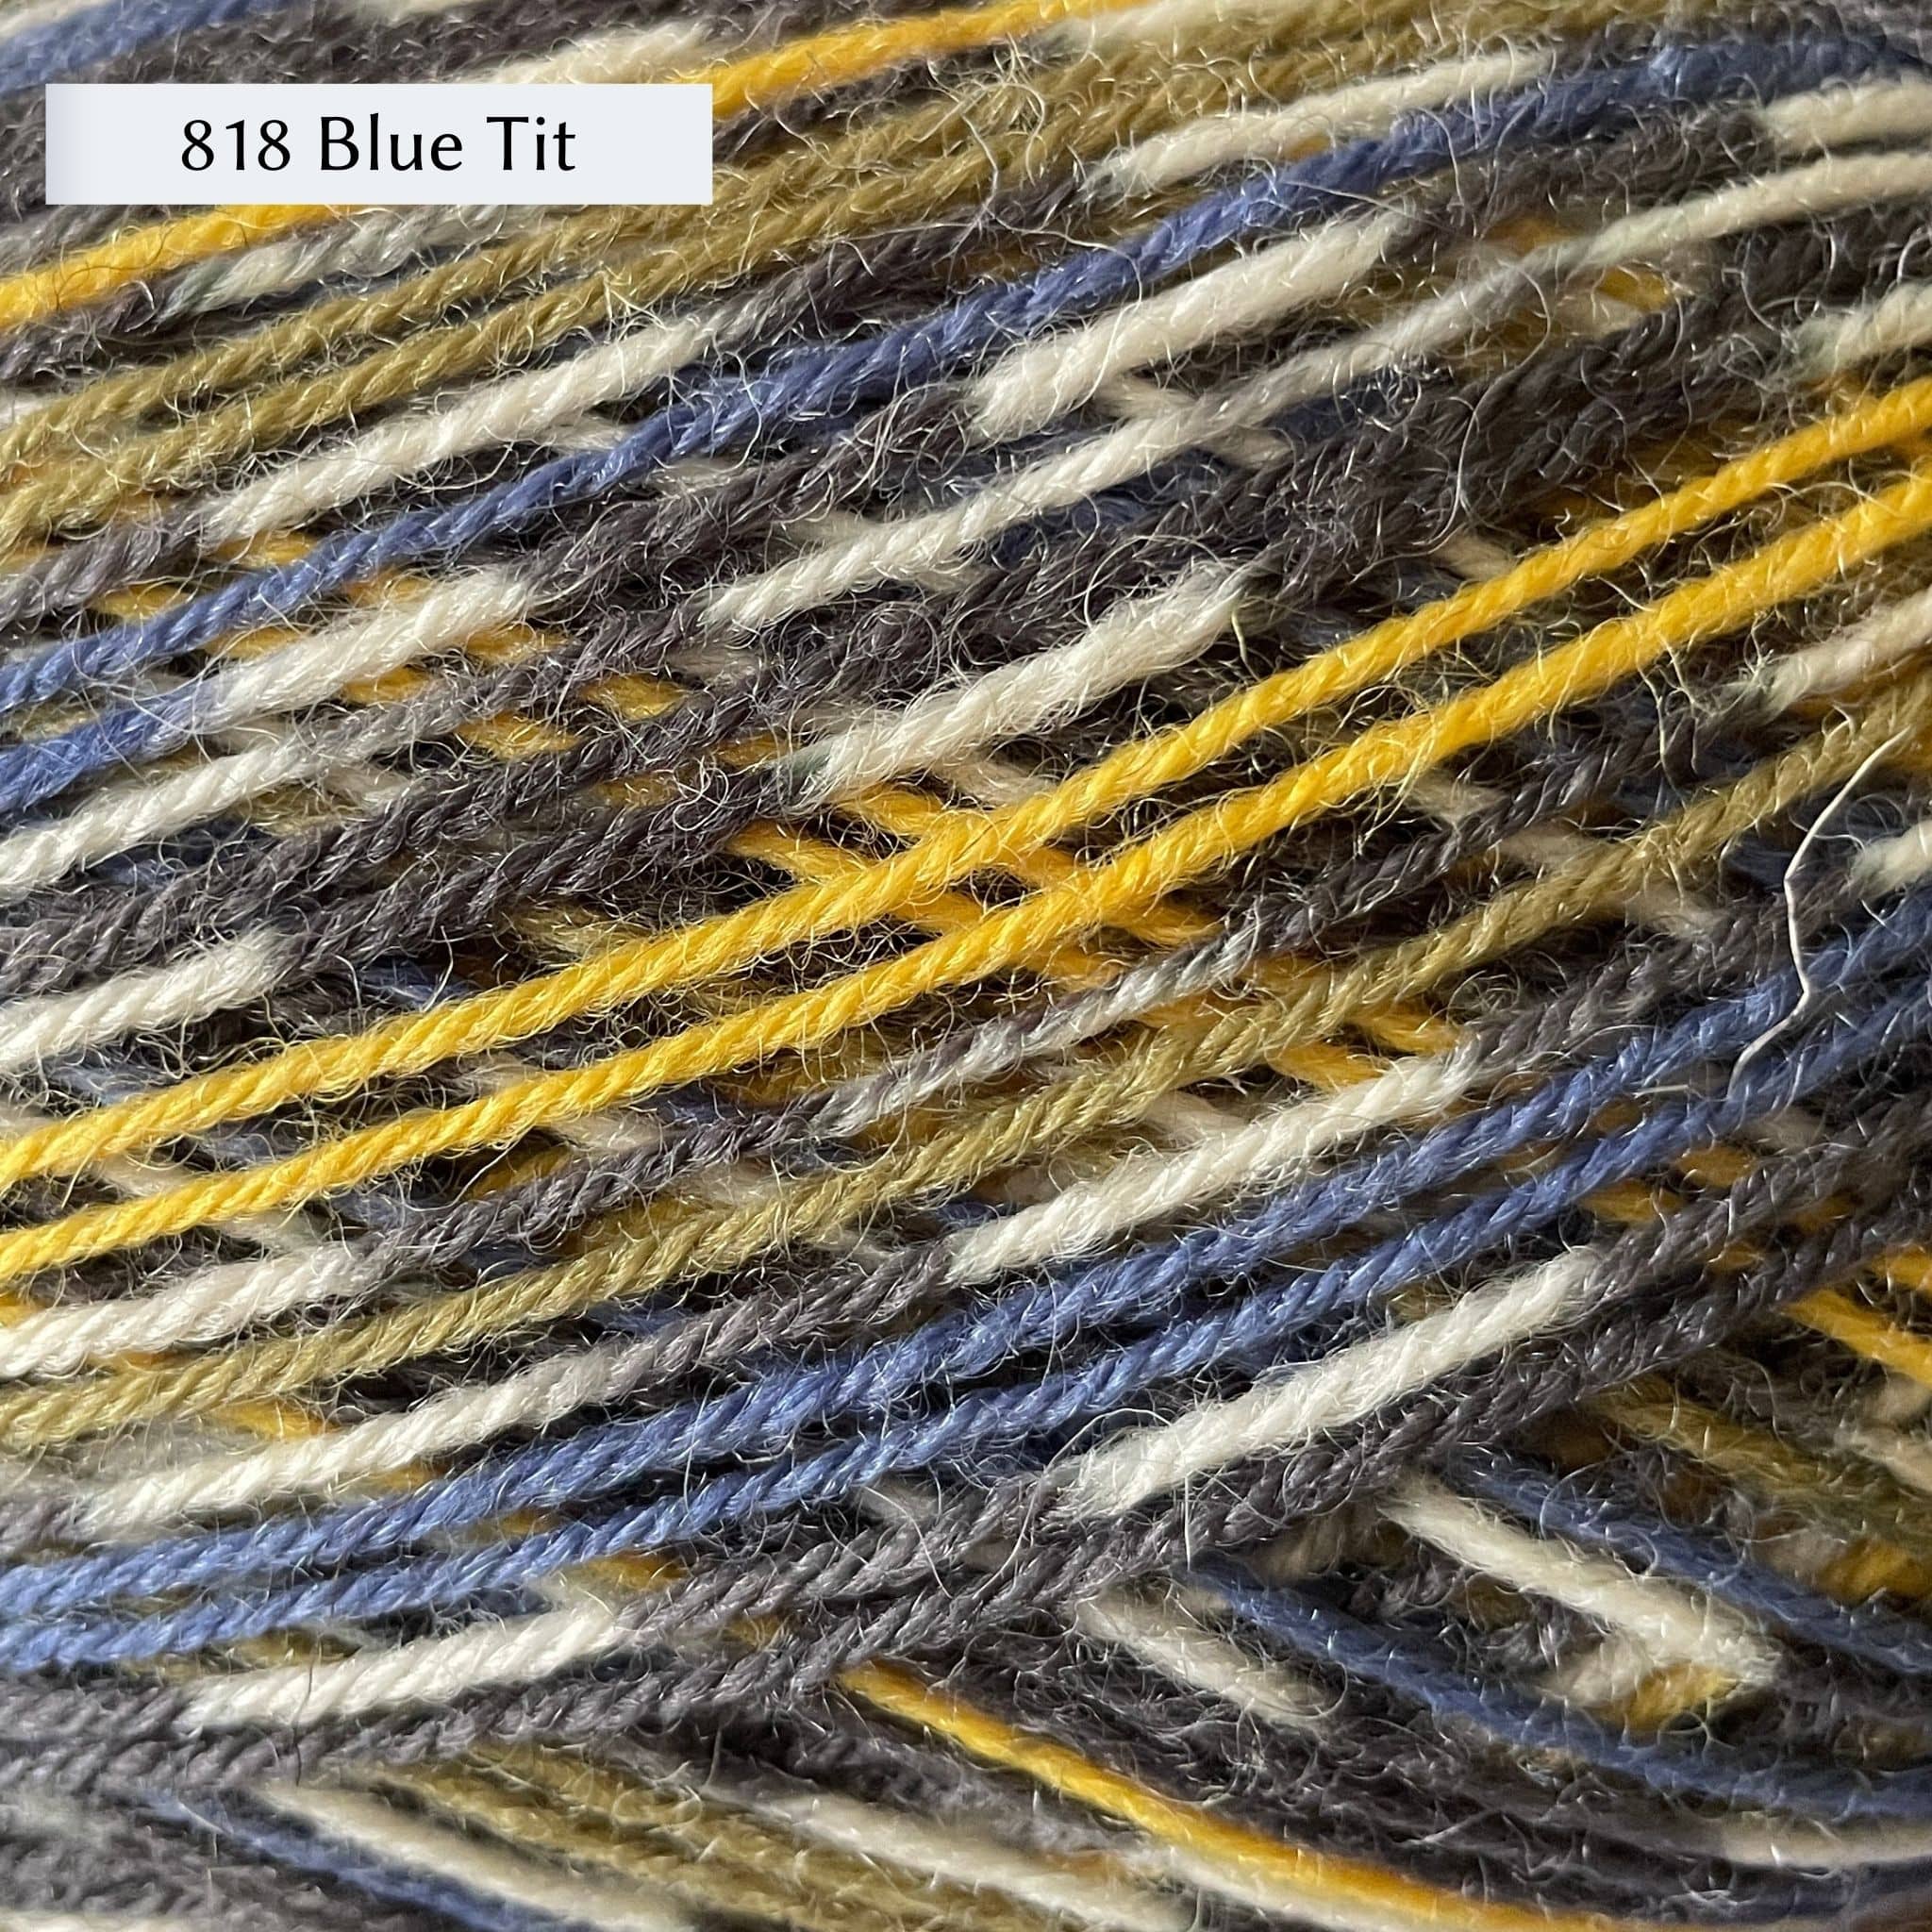 West Yorkshire Spinners Signature 4ply yarn, fingering weight, in color 818 Blue Tit, a bird-inspired self-printing colorway with yellow, blue, and olive green stripes and self-patterning sections with black and white